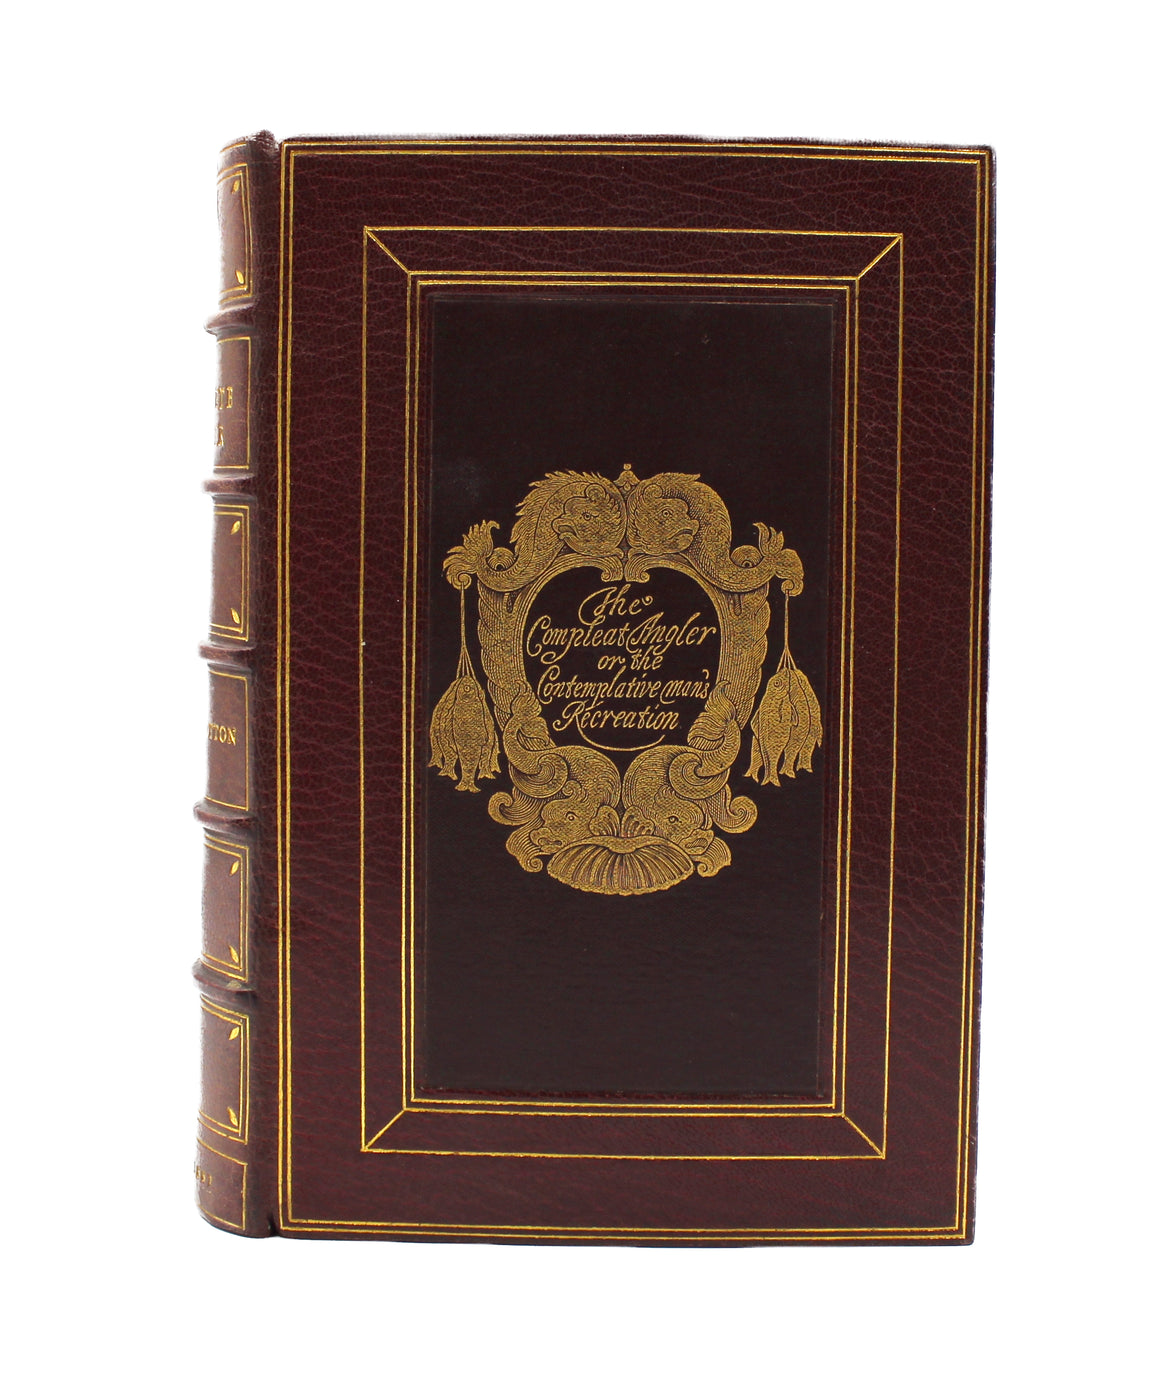 The Complete Angler by Izaak Walton and Charles Cotton, Edited by Harris Nicolas, Fourth Nicolas Edition, 1887